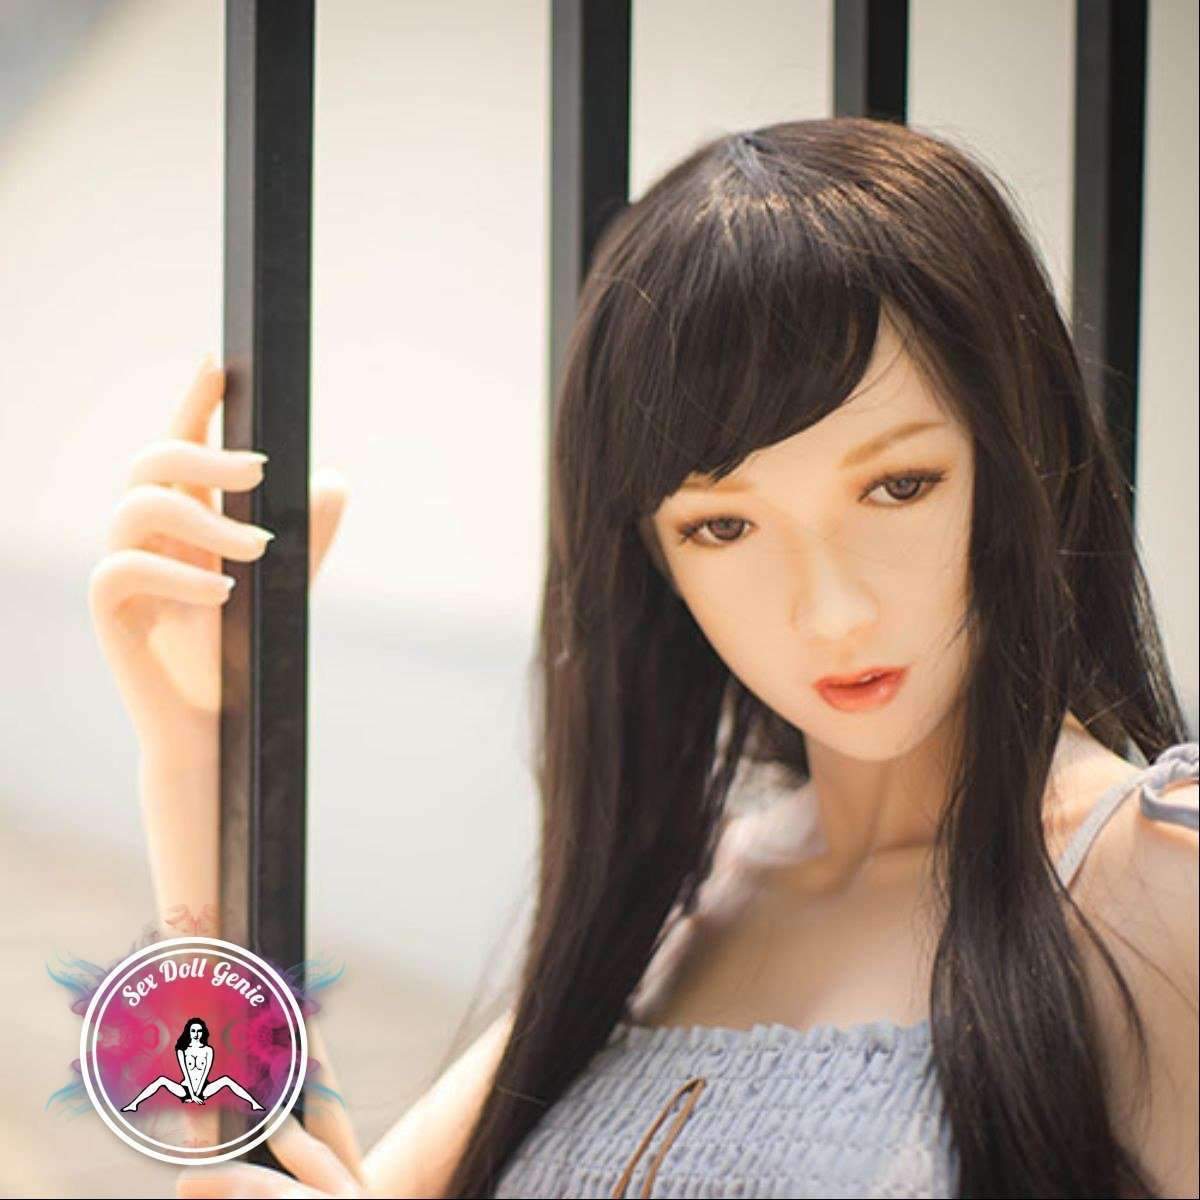 DS Doll - 163Plus - Jiayi Head - Type 2 D Cup Silicone Doll-26